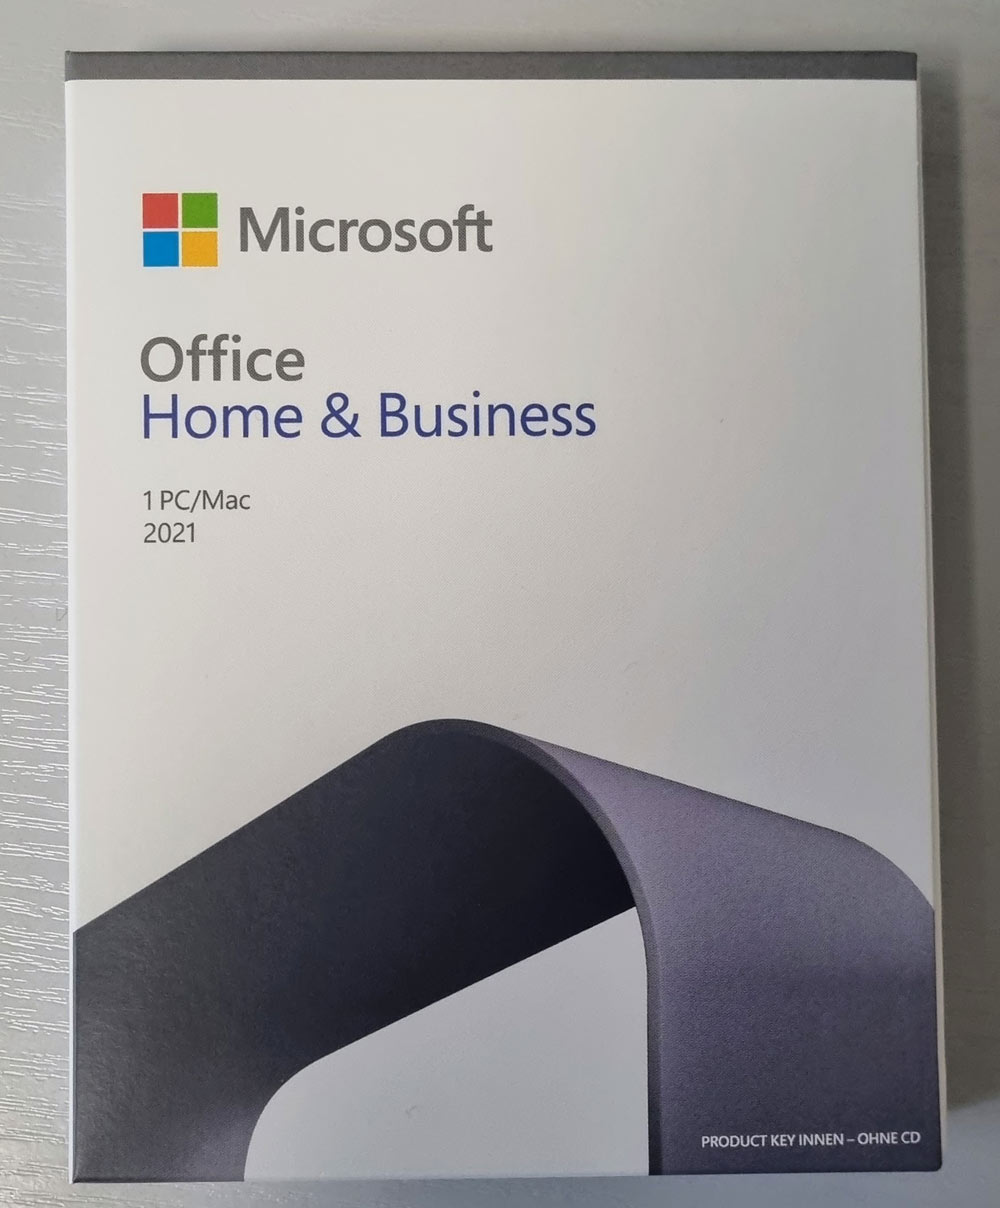 Microsoft Office Home & Business 2021 Verpackung